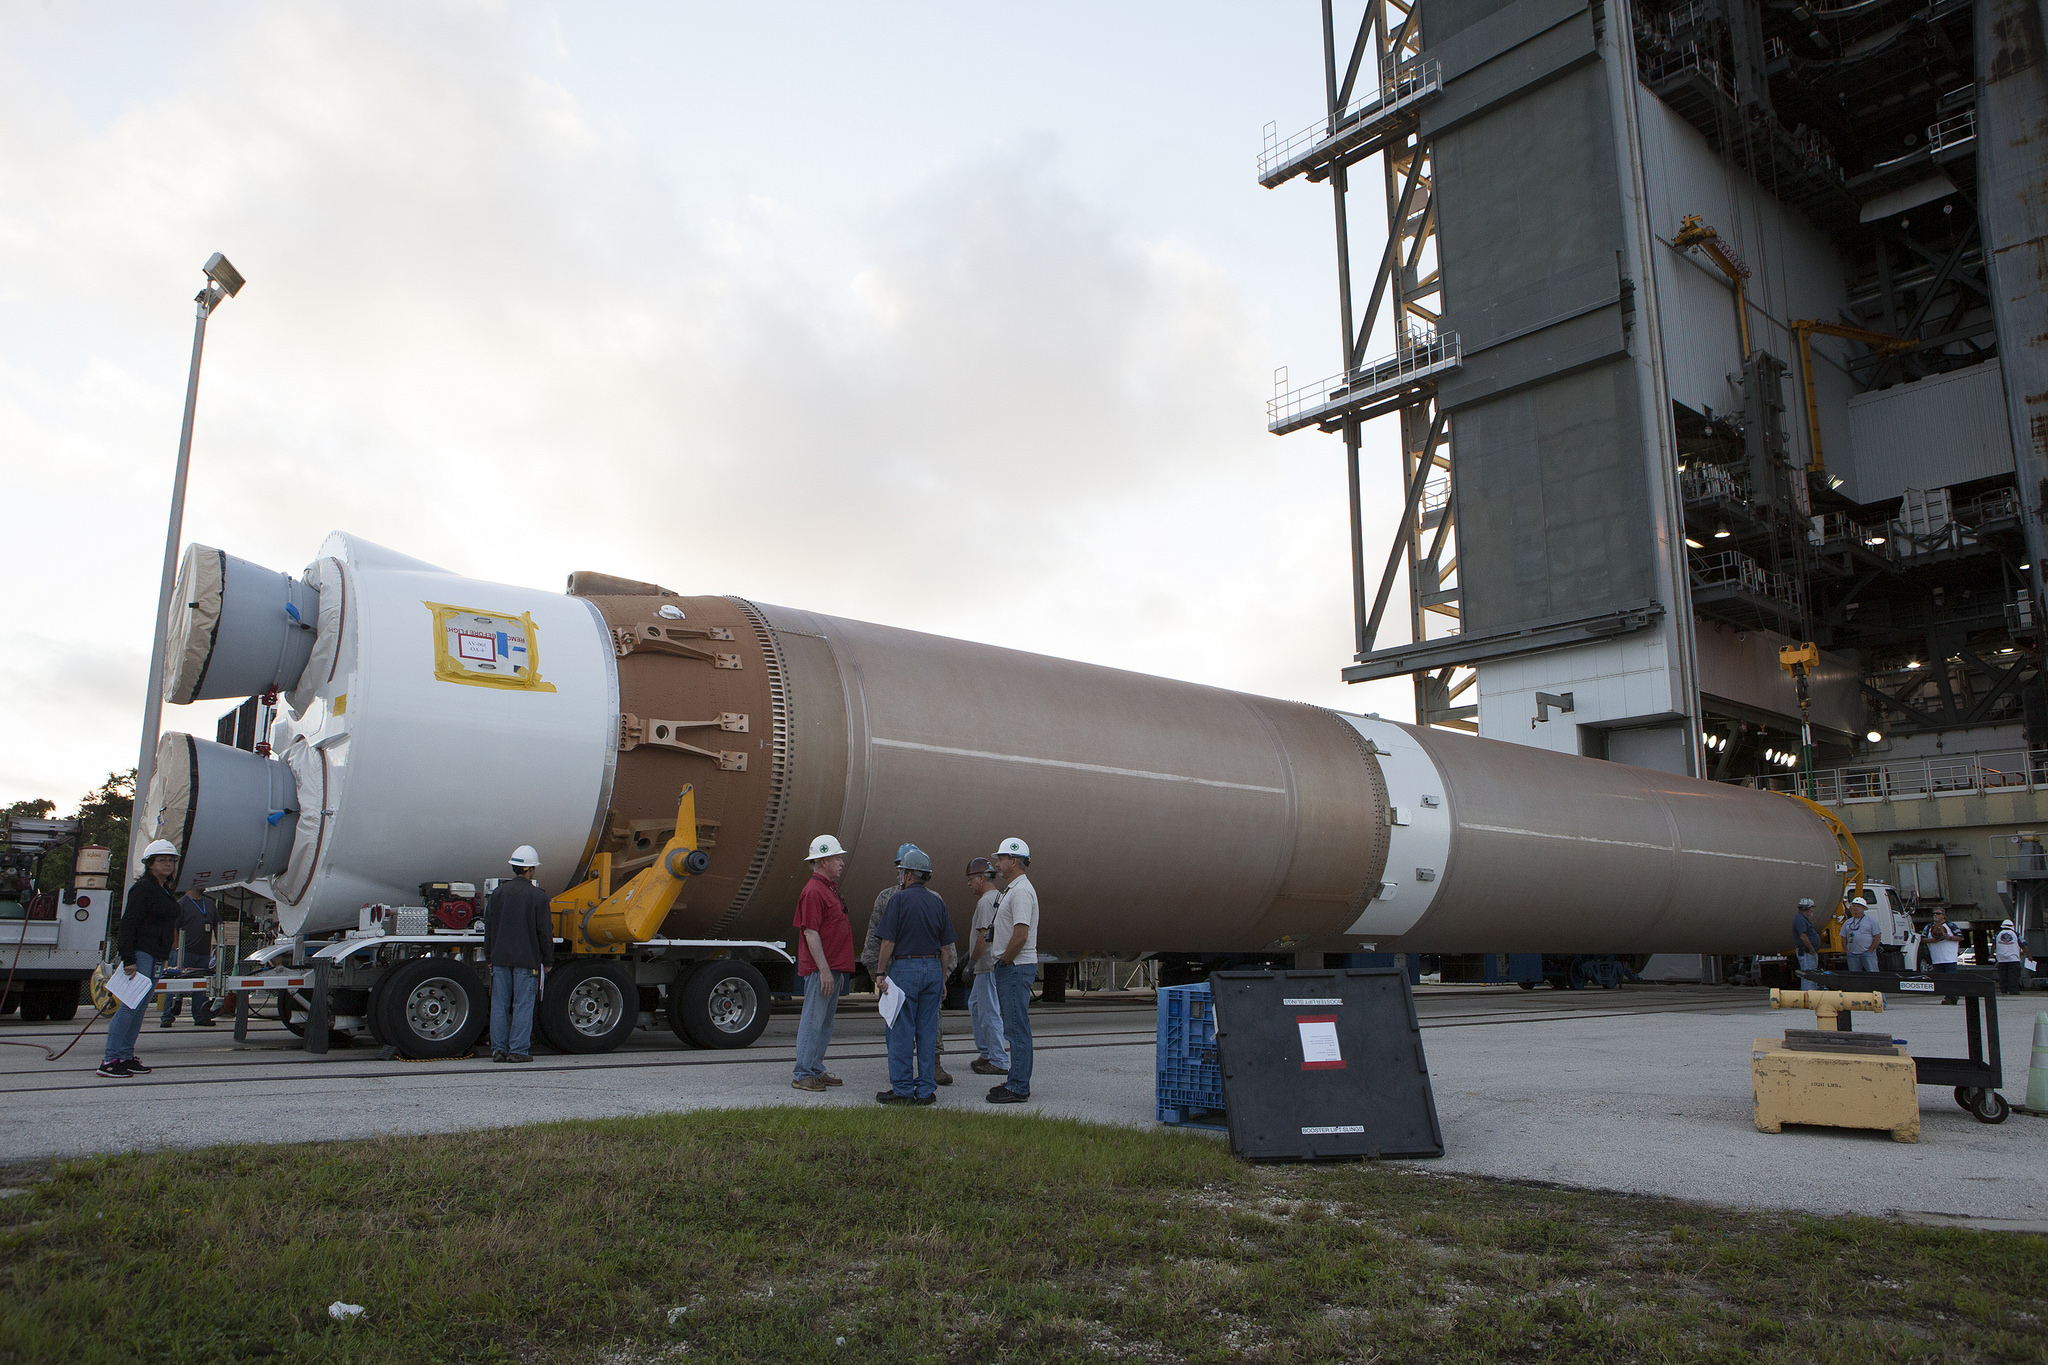 The ULA Atlas-V booster that will lift the Orbital ATK Enhanced Cygnus spacecraft into orbit arrives at the Space Launch Complex 41 Vertical Integration Facility on Cape Canaveral Air Force Station in Florida. Photo Credit: NASA/Kim Shiflett